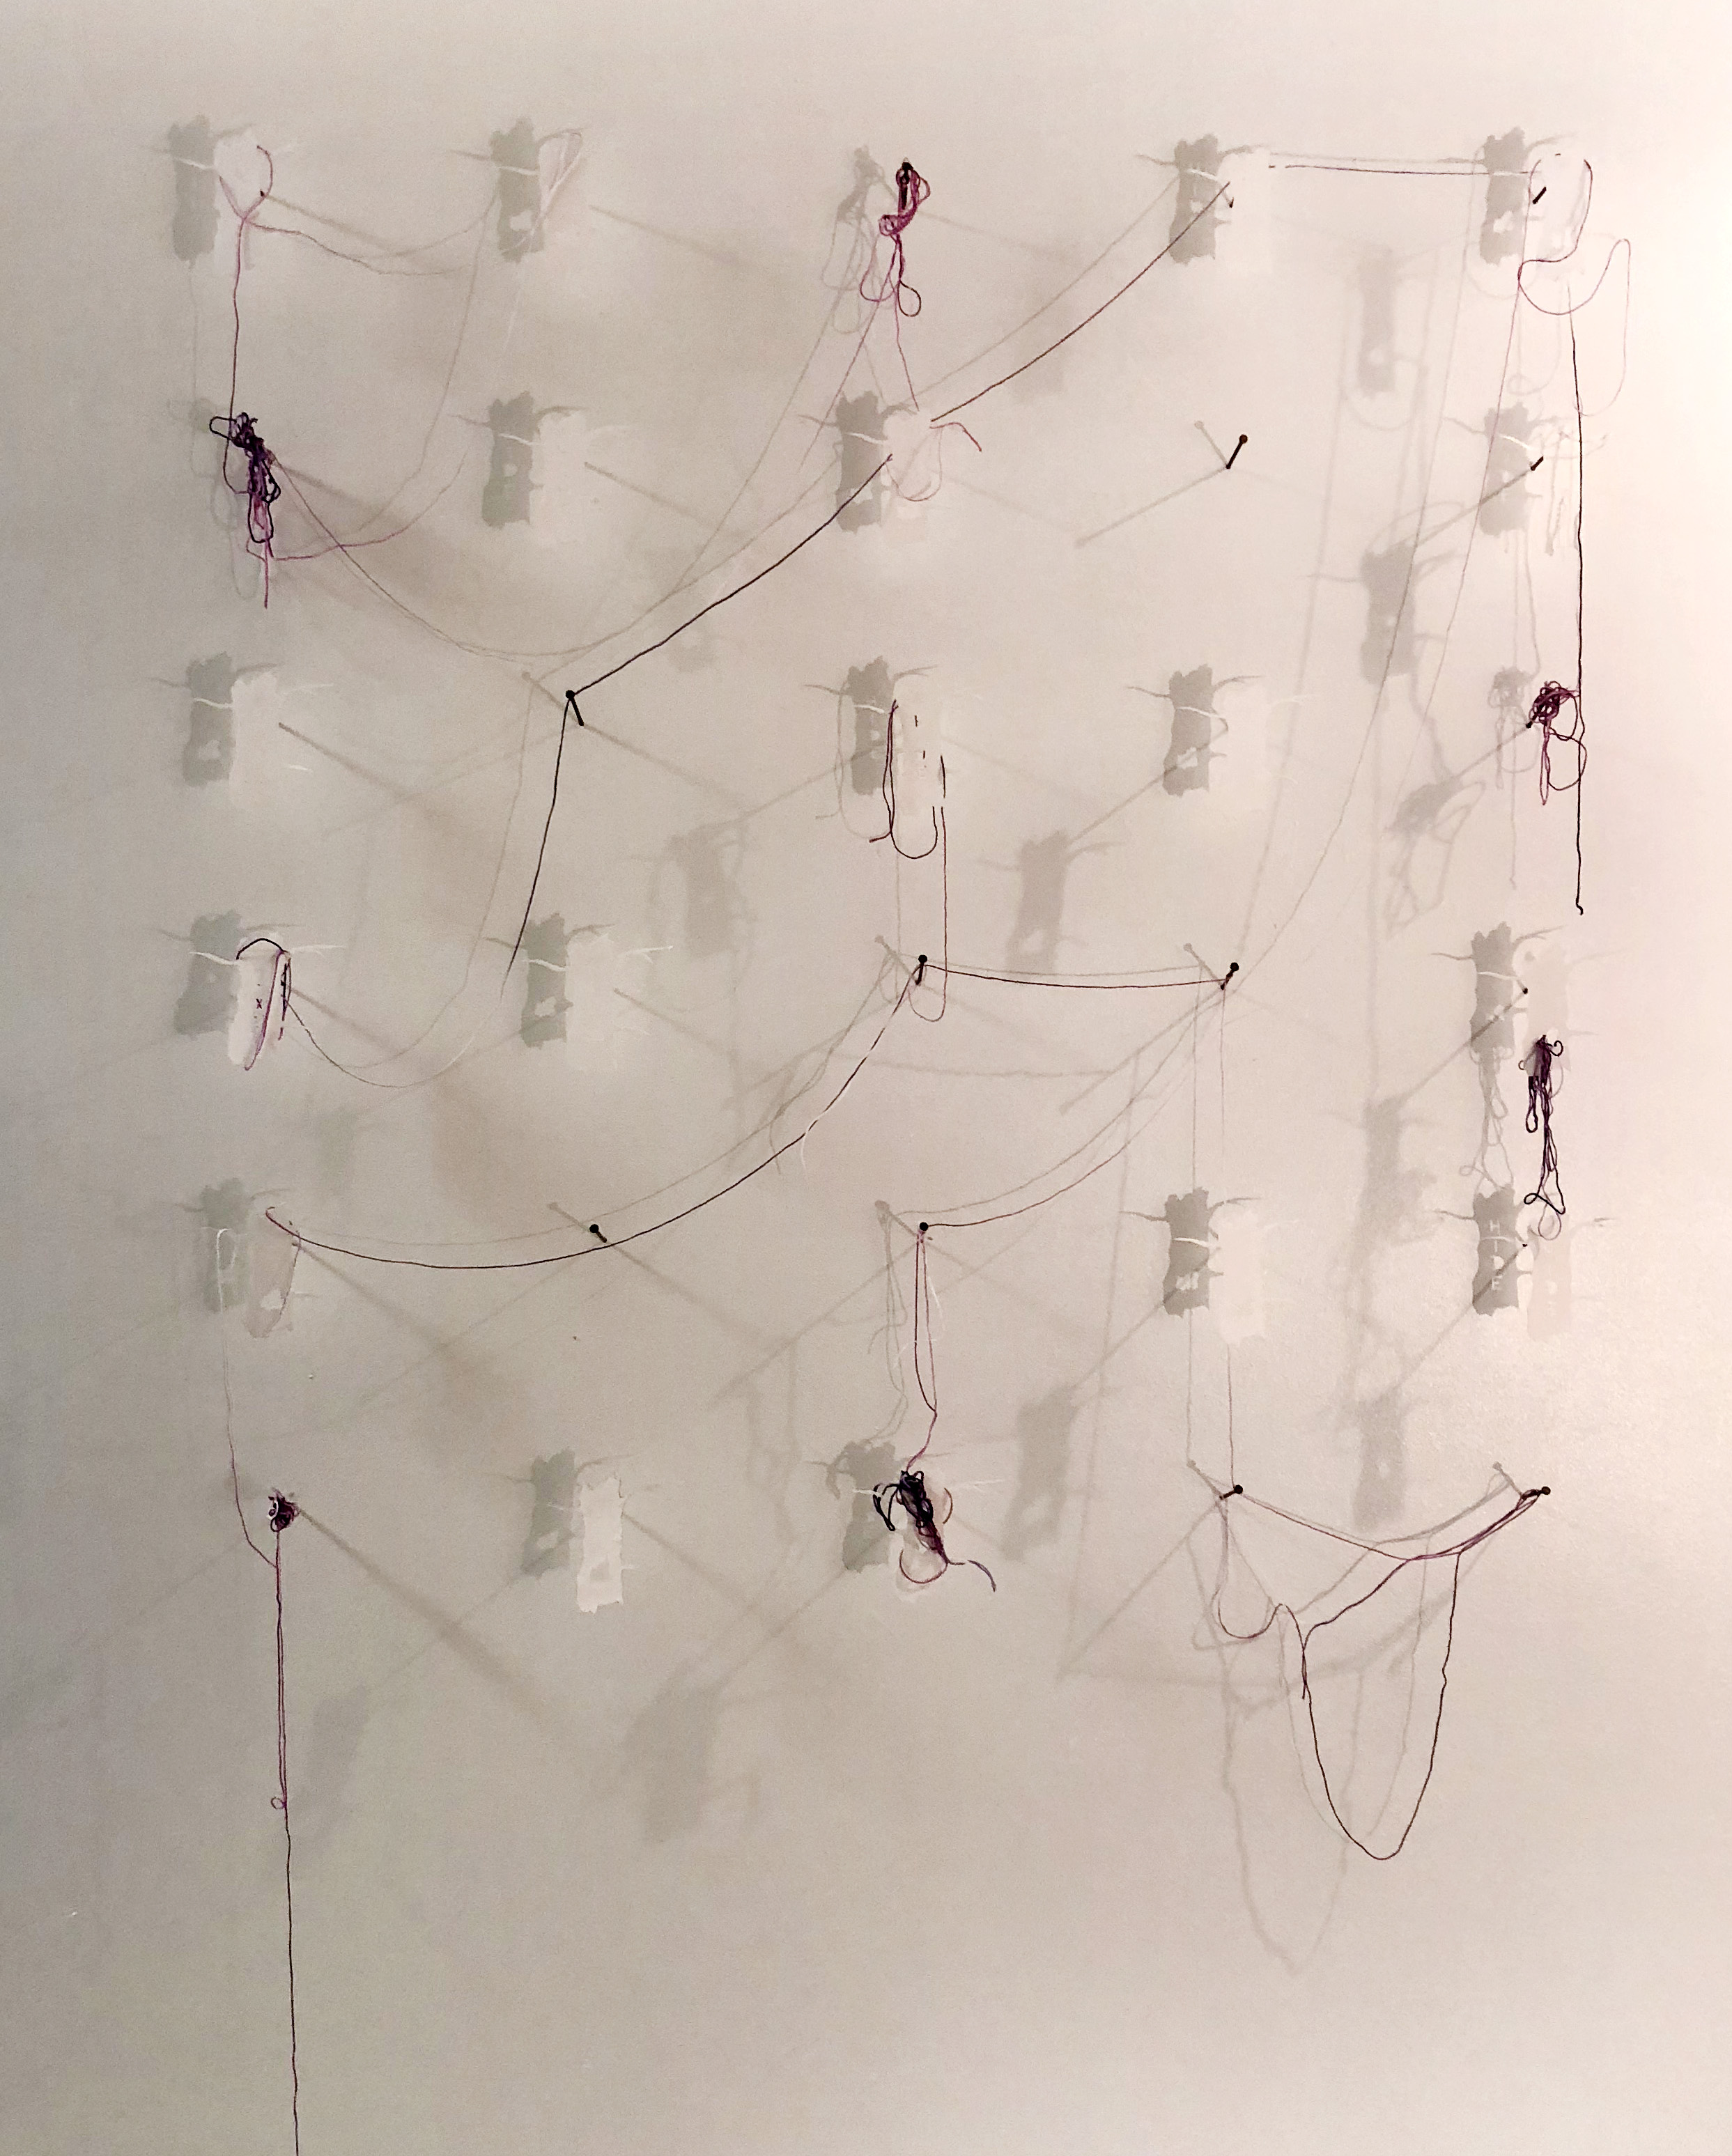  Student: Hanna Kesty Class: Sculpture I Project: “Form from Flat” Cut paper, string, steel, projected image.  2018 